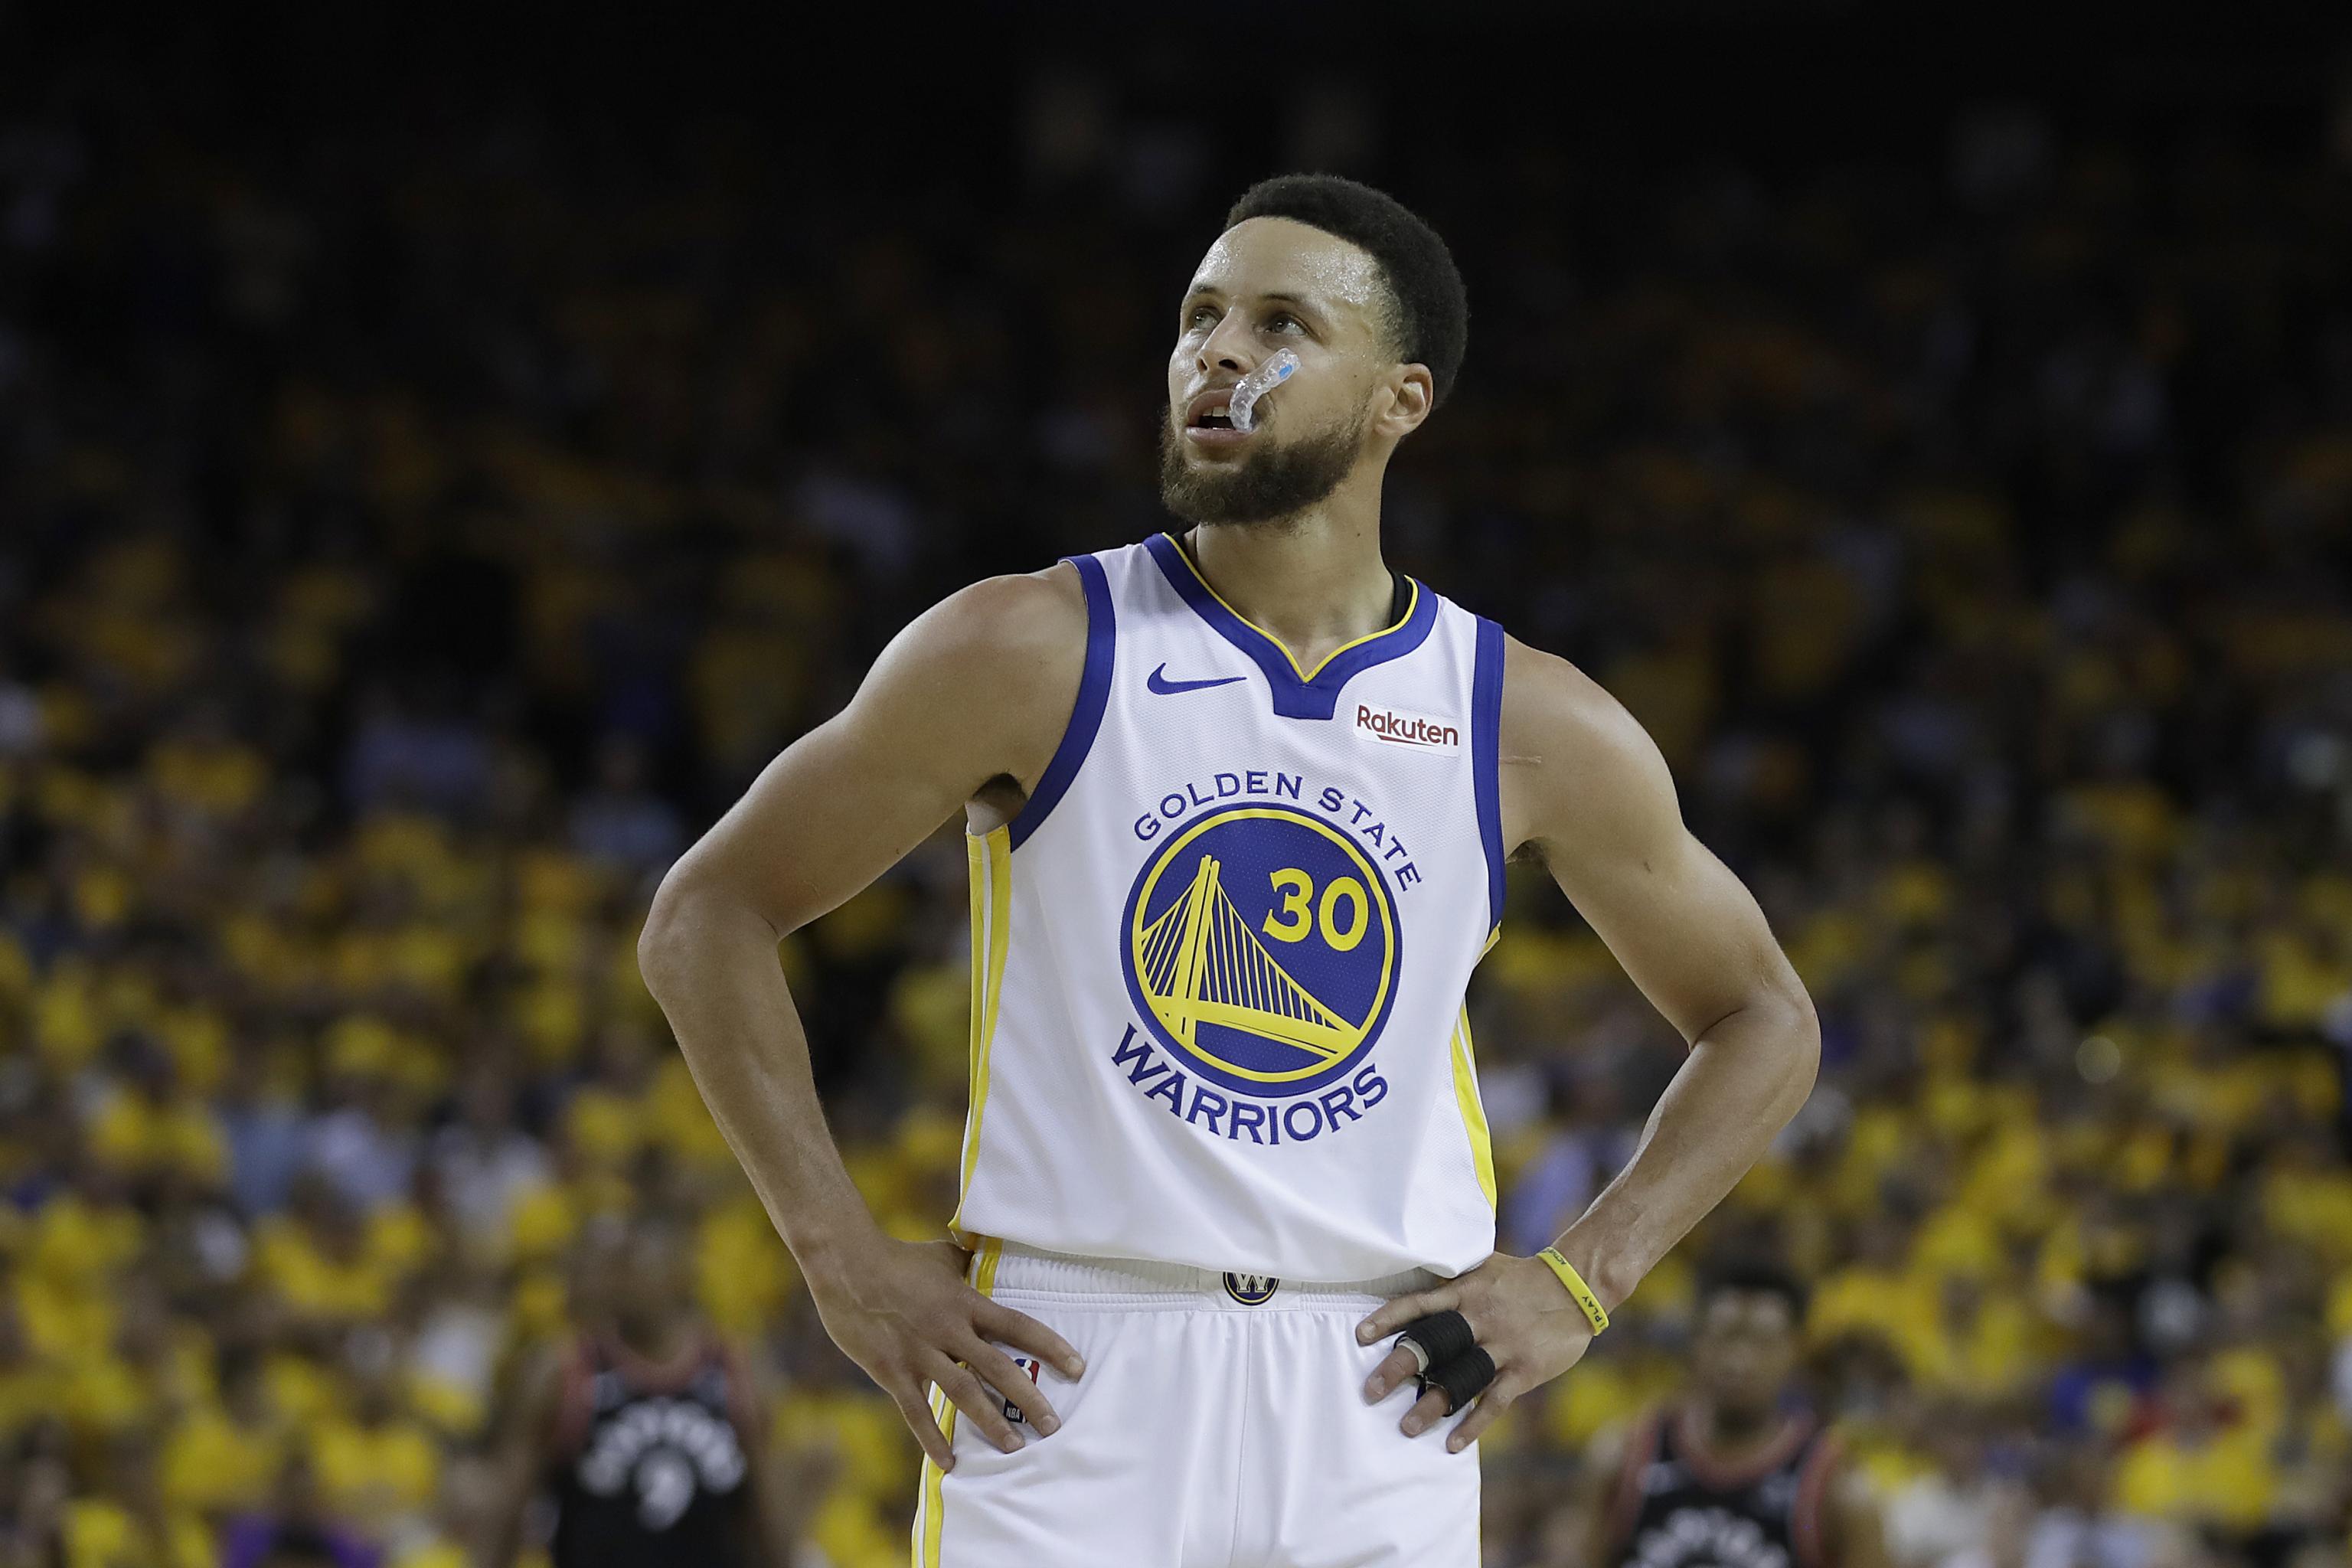 Here's What Magic Johnson Said About Steph Curry's GOAT Point Guard Claim –